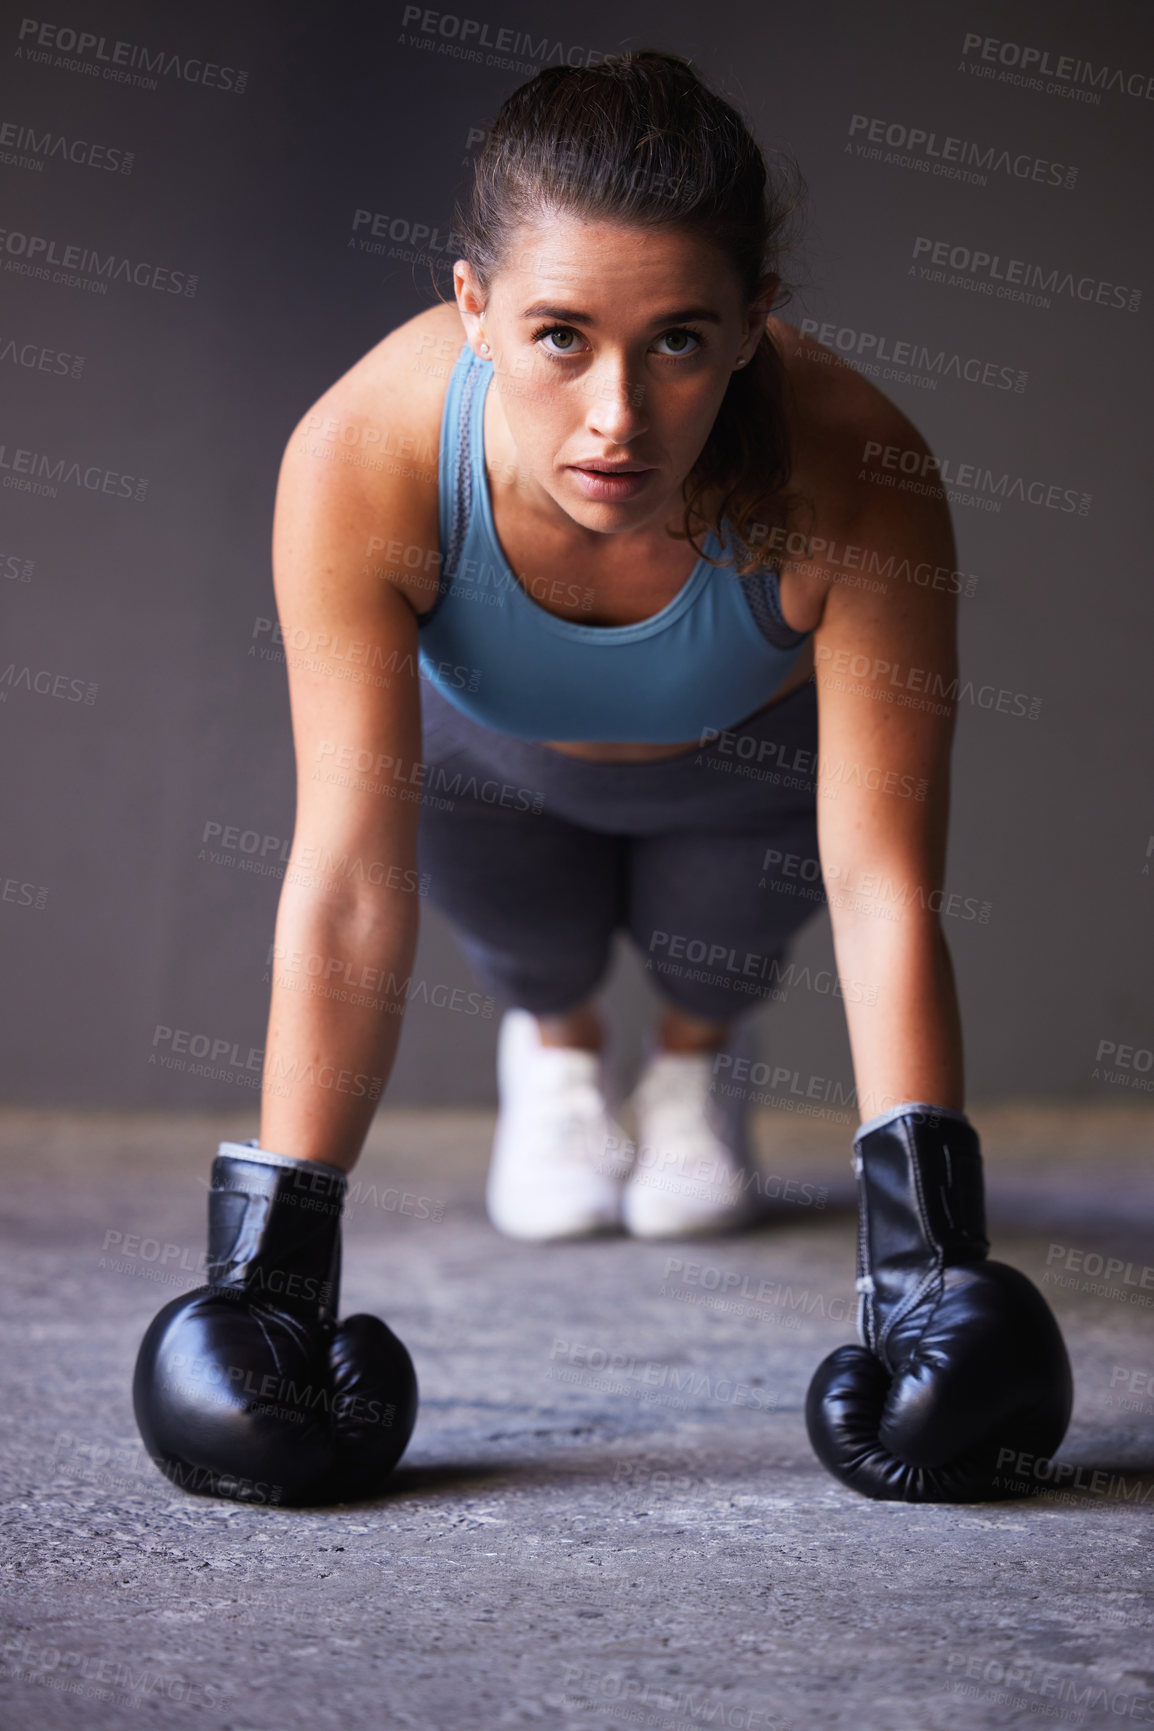 Buy stock photo Portrait of a young woman exercising while wearing boxing gloves